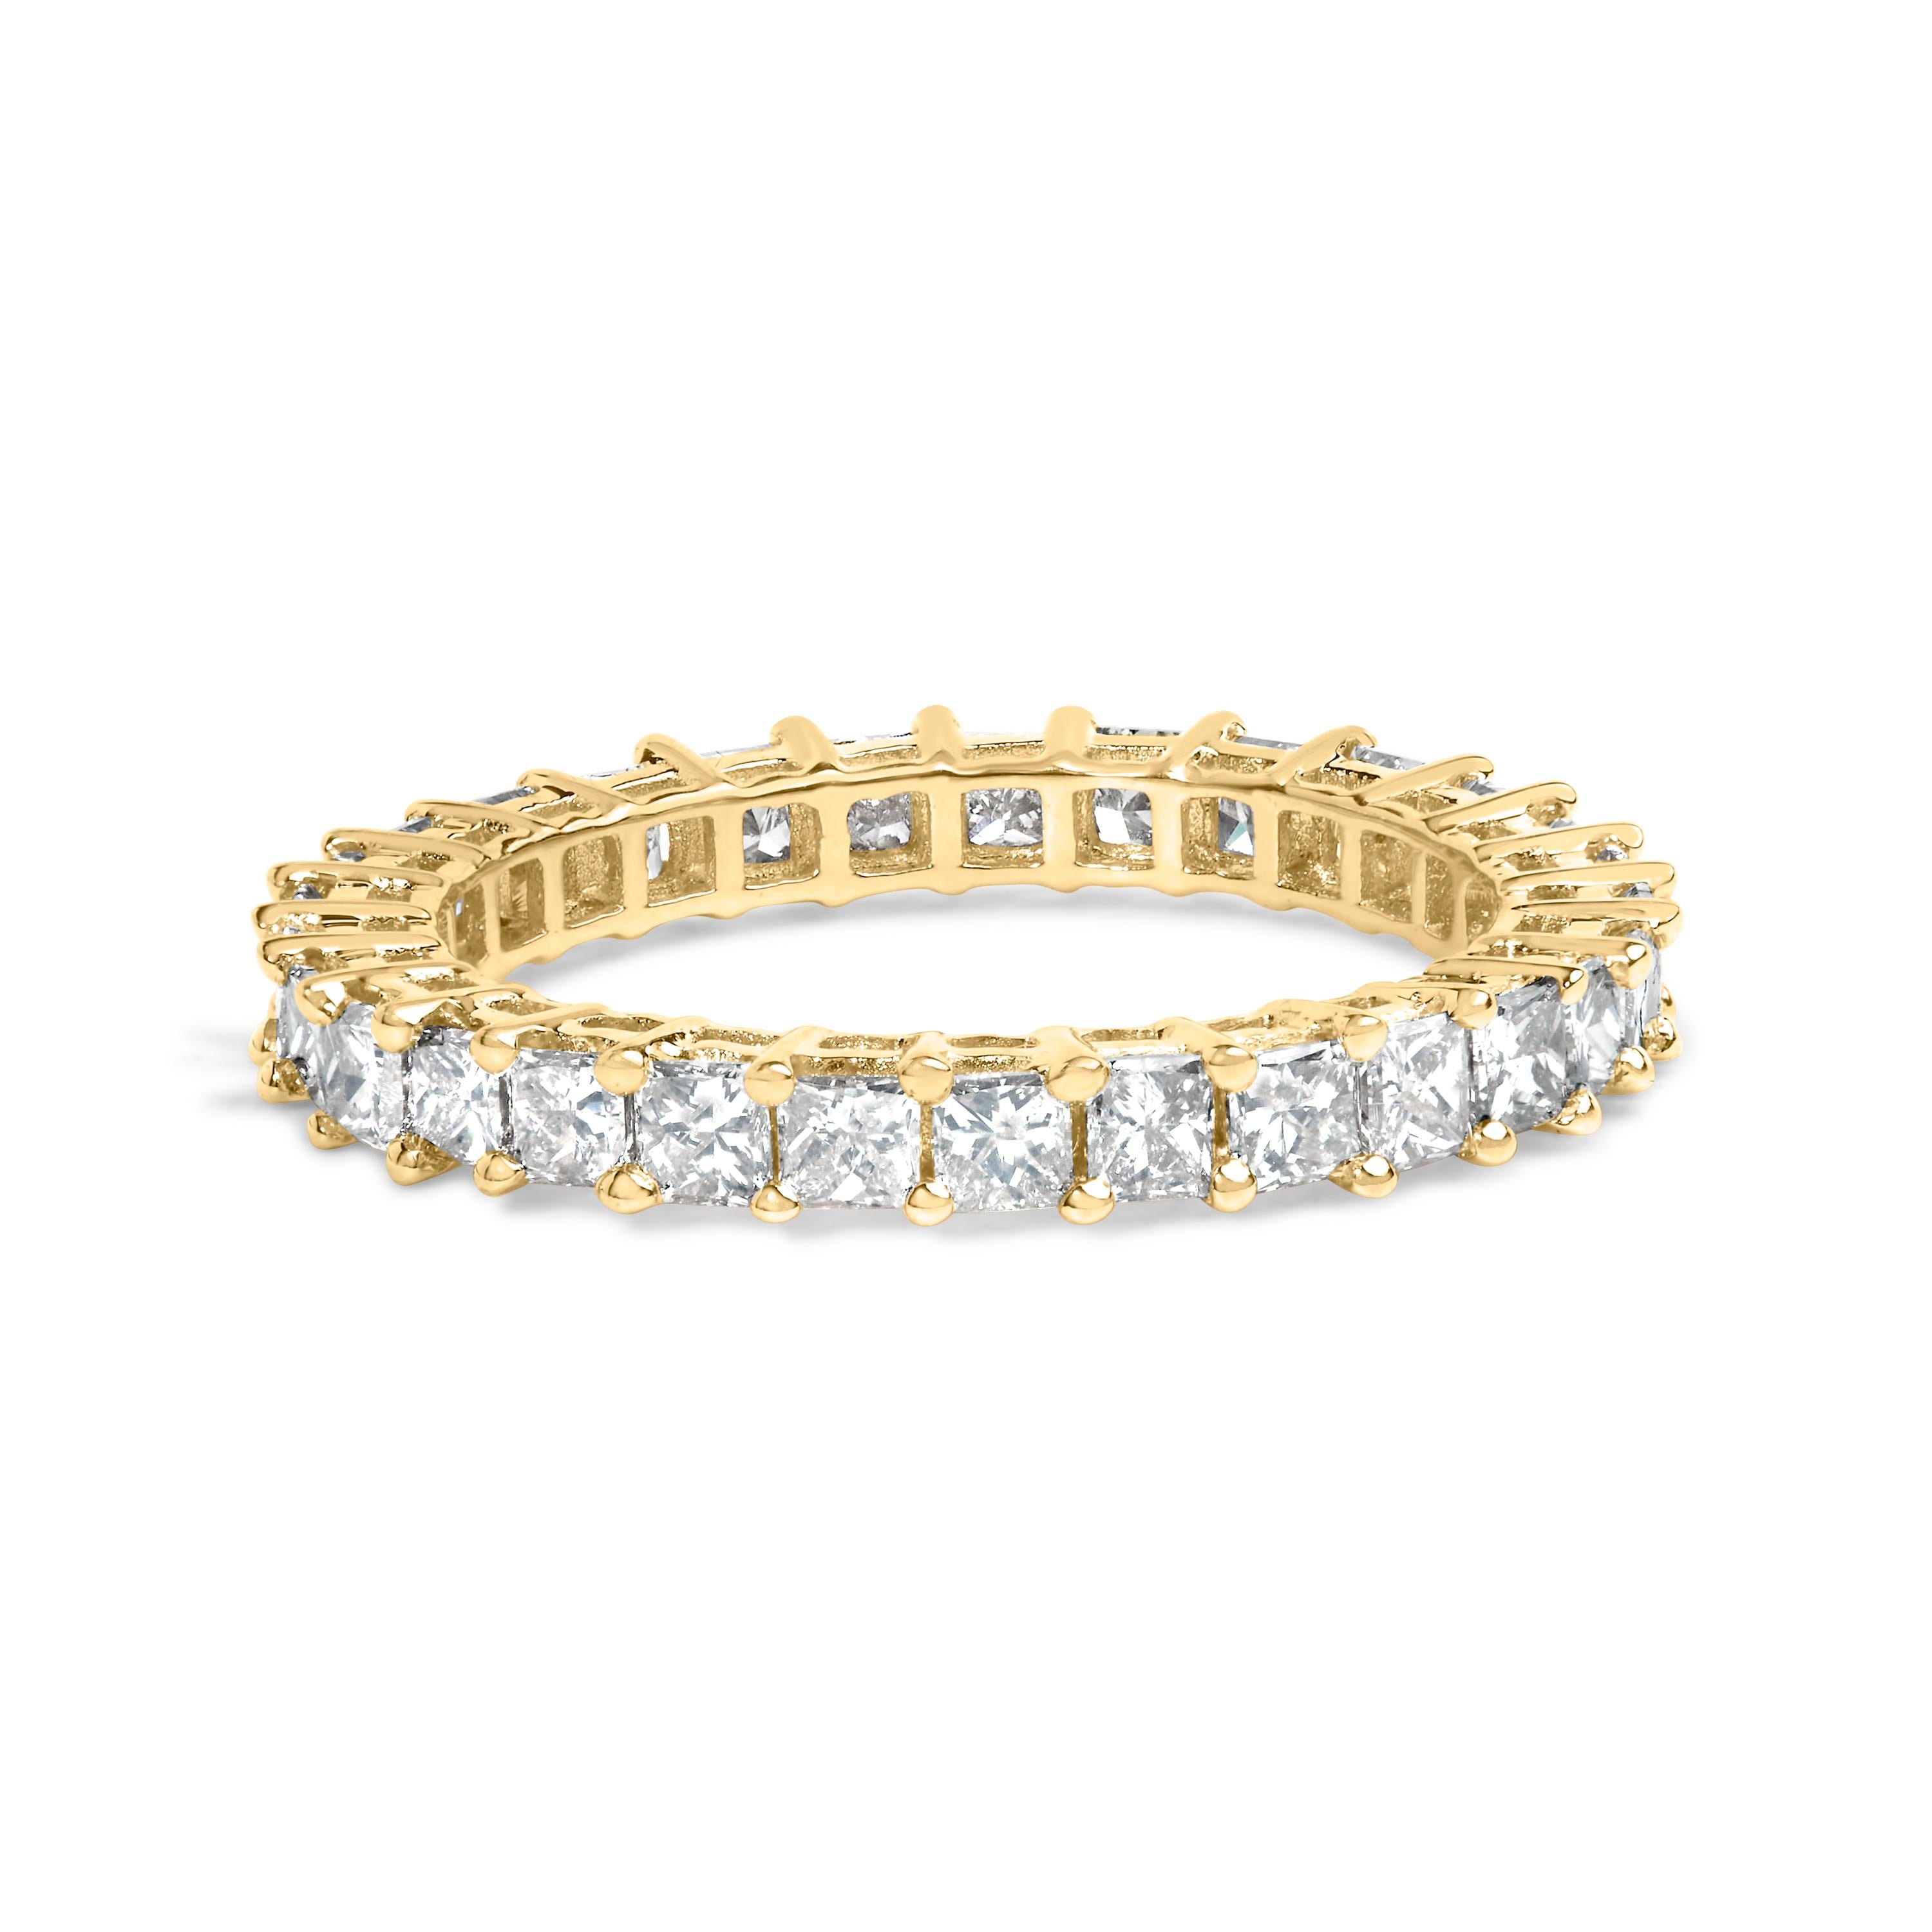 Captured in this exquisite creation is the essence of eternal elegance – a 14K yellow gold eternity band that whispers tales of everlasting love and commitment. Each of the 29 natural, princess-cut diamonds, totaling a resplendent 2 carats, is